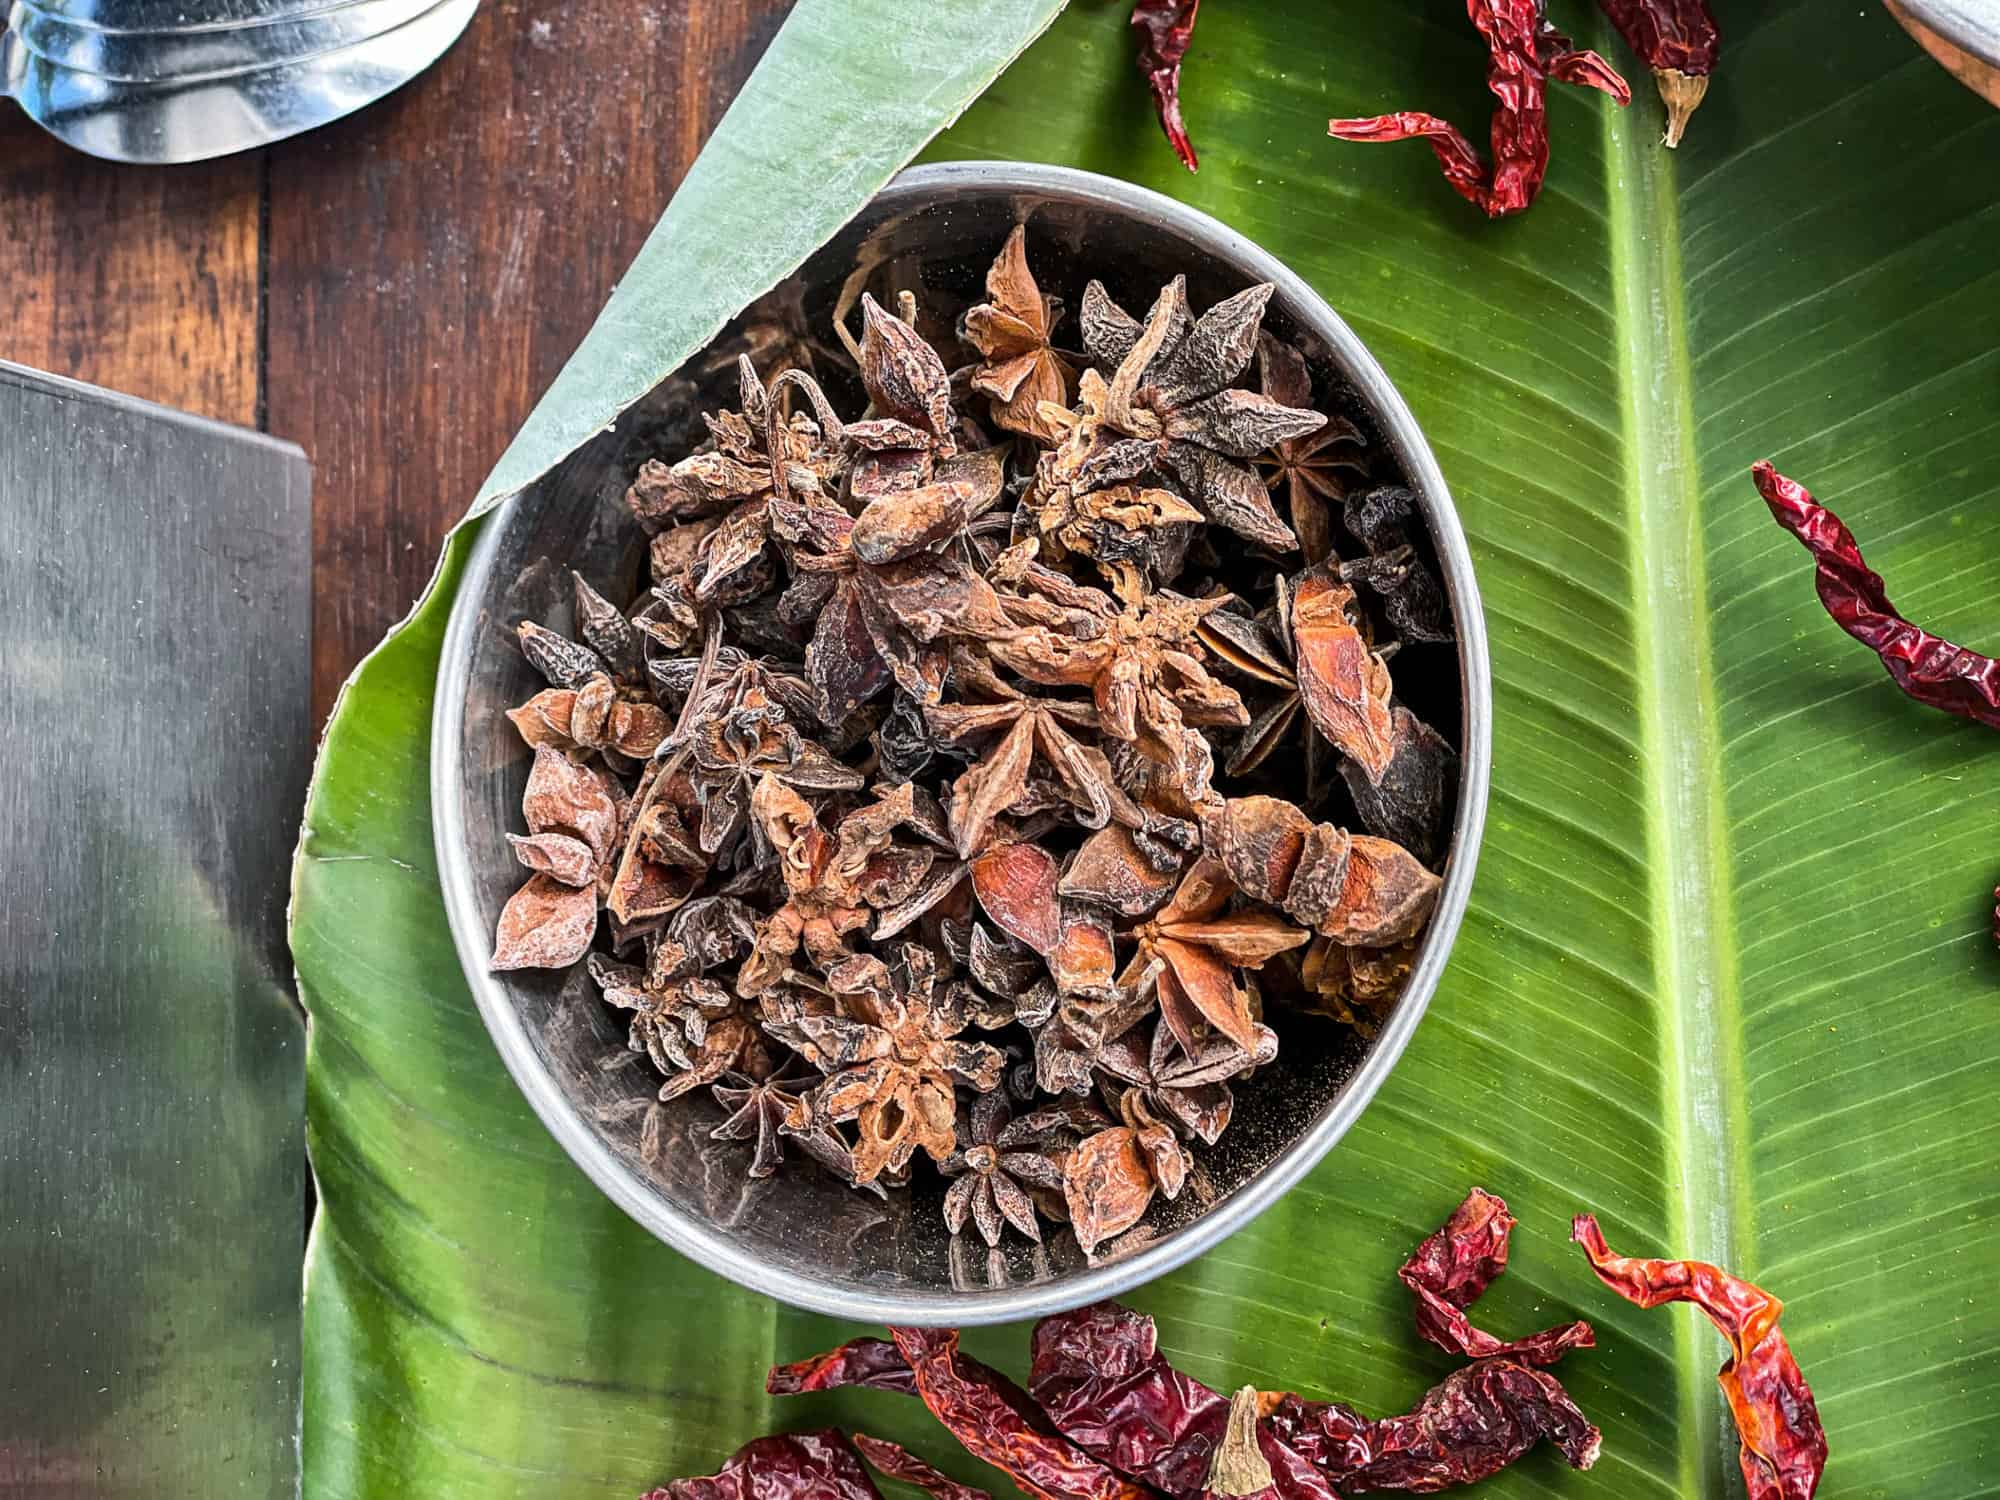 Mauritius - sustainable food tourism - star anise at cooking lesson